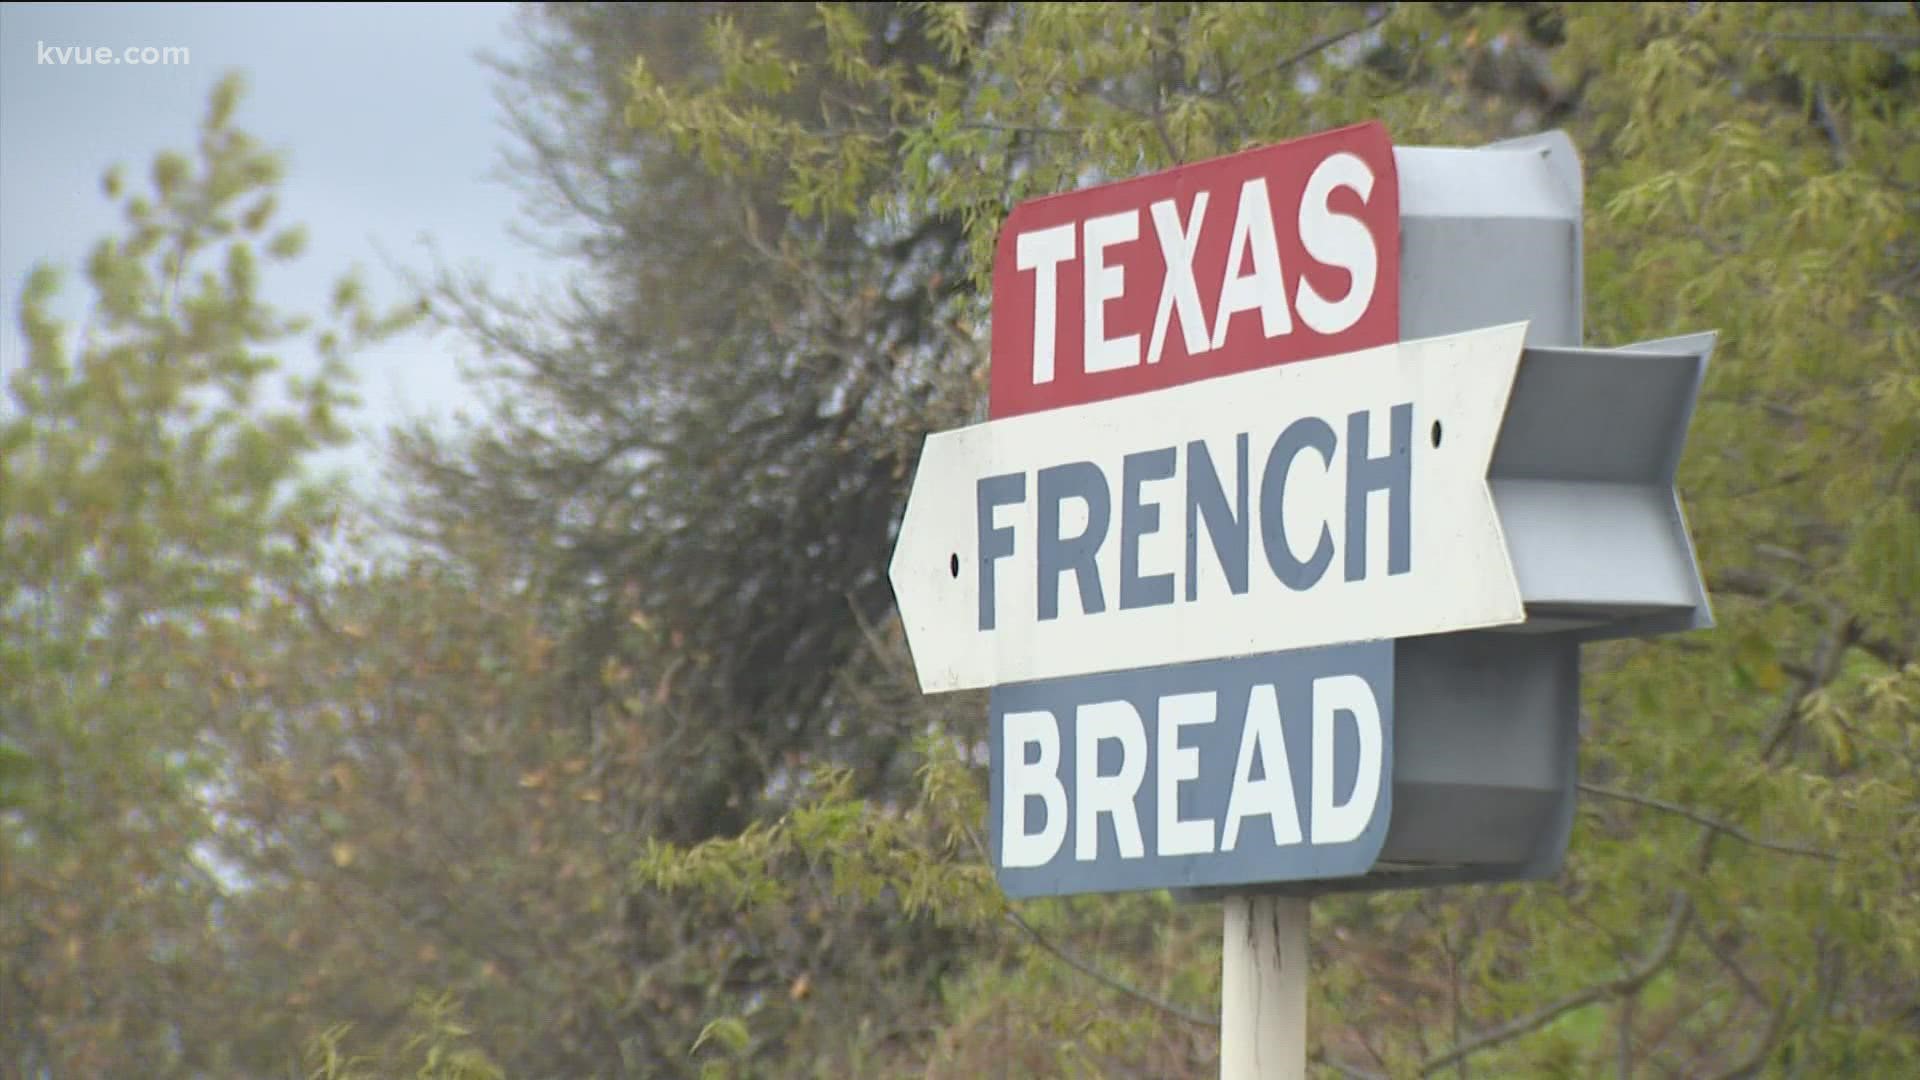 The people who own Texas French Bread said in the coming weeks they will relaunch the store's wholesale bakery operations.